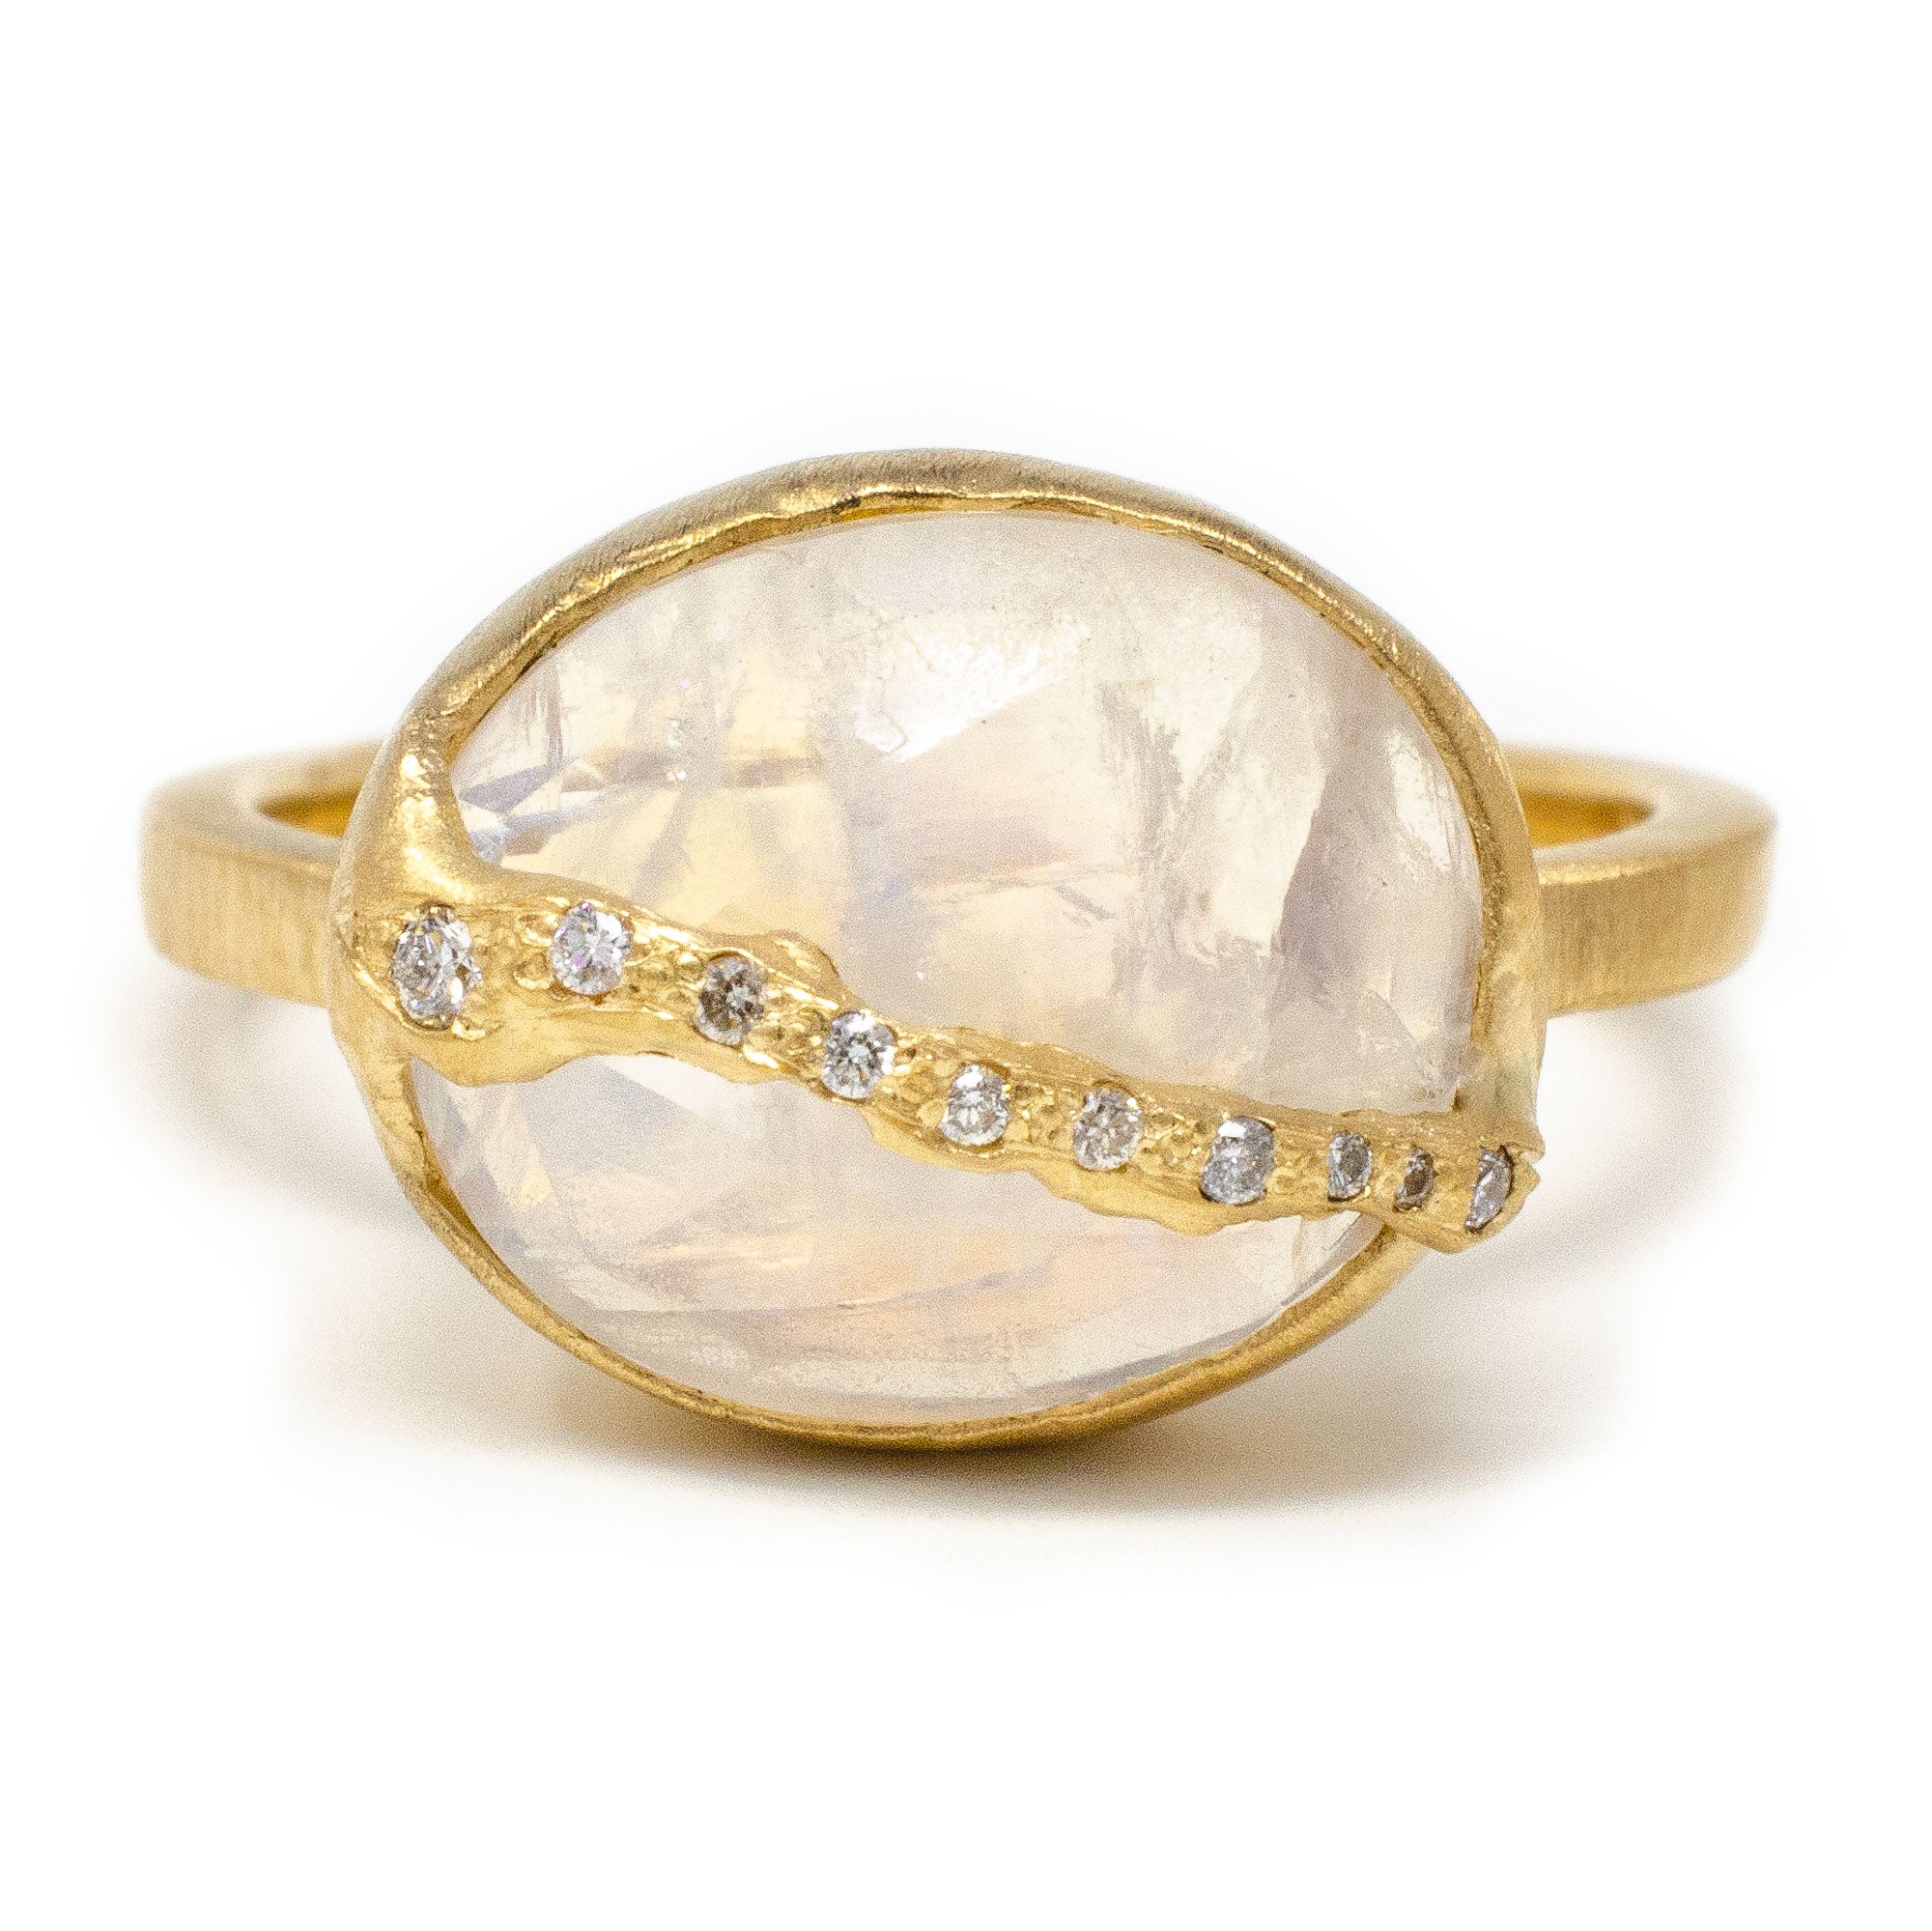 Blue Moonstone Ring - Size 12 | The Design Theory